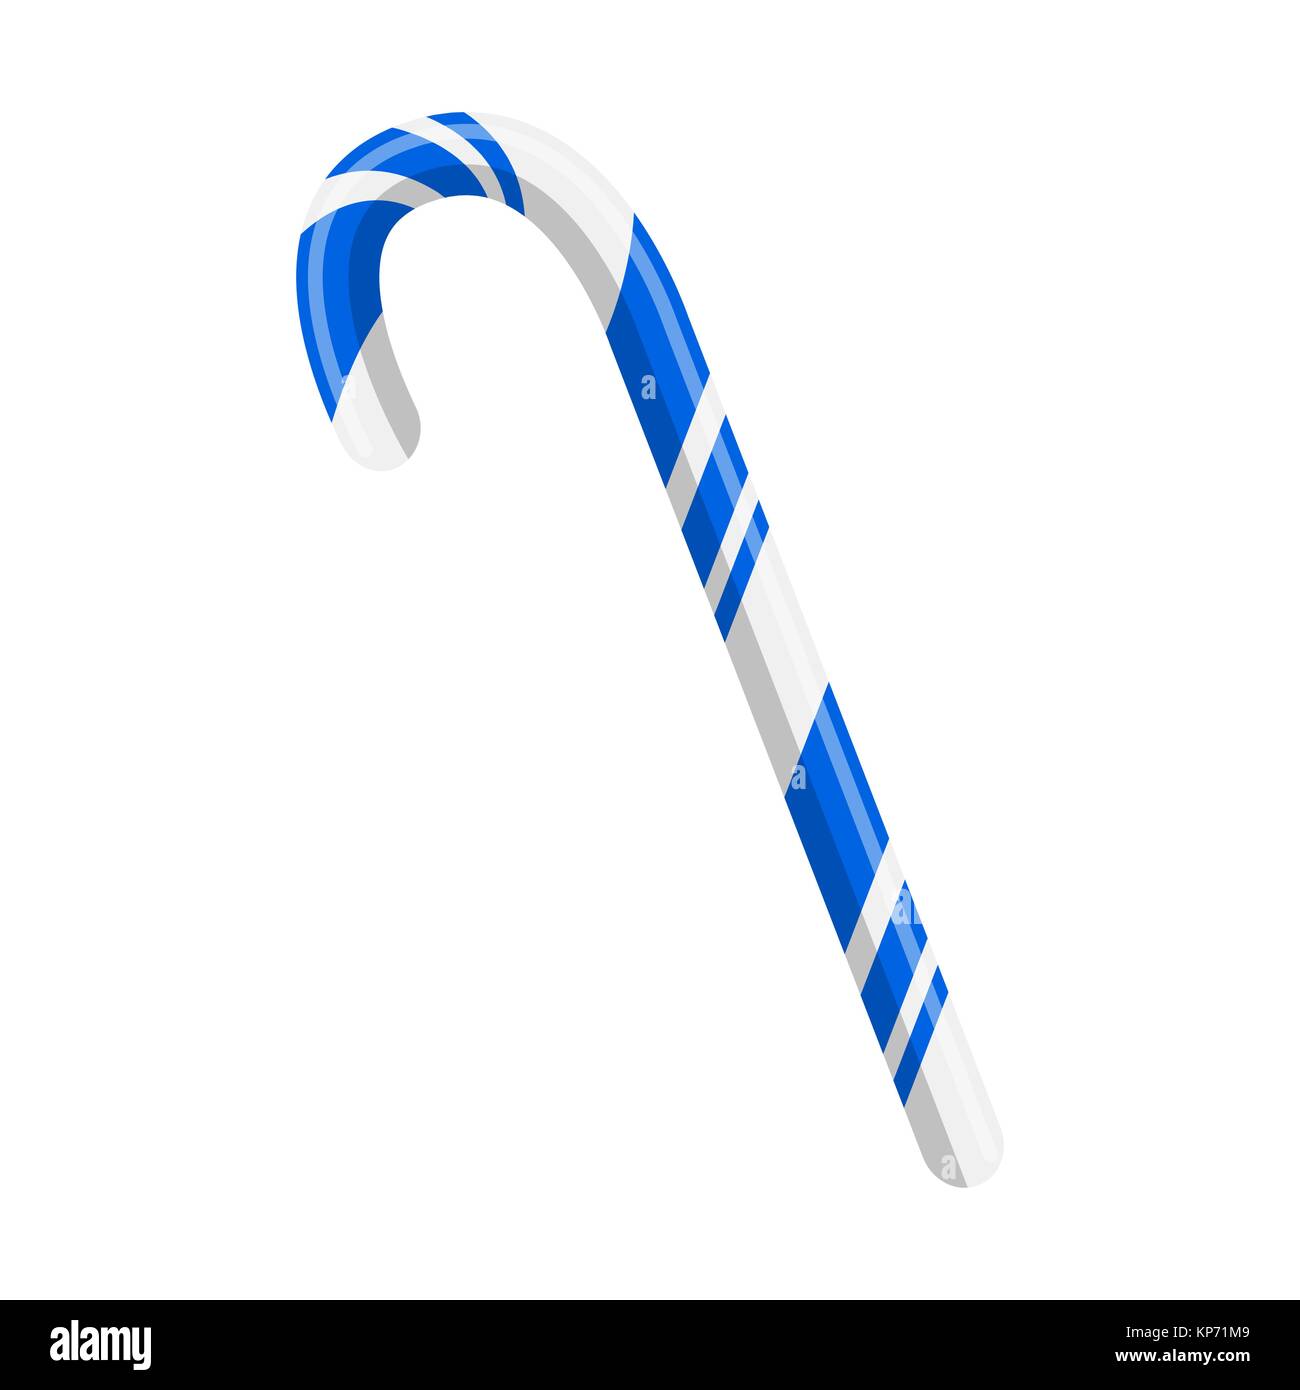 https://c8.alamy.com/comp/KP71M9/candy-cane-for-christmas-design-isolated-on-white-background-KP71M9.jpg